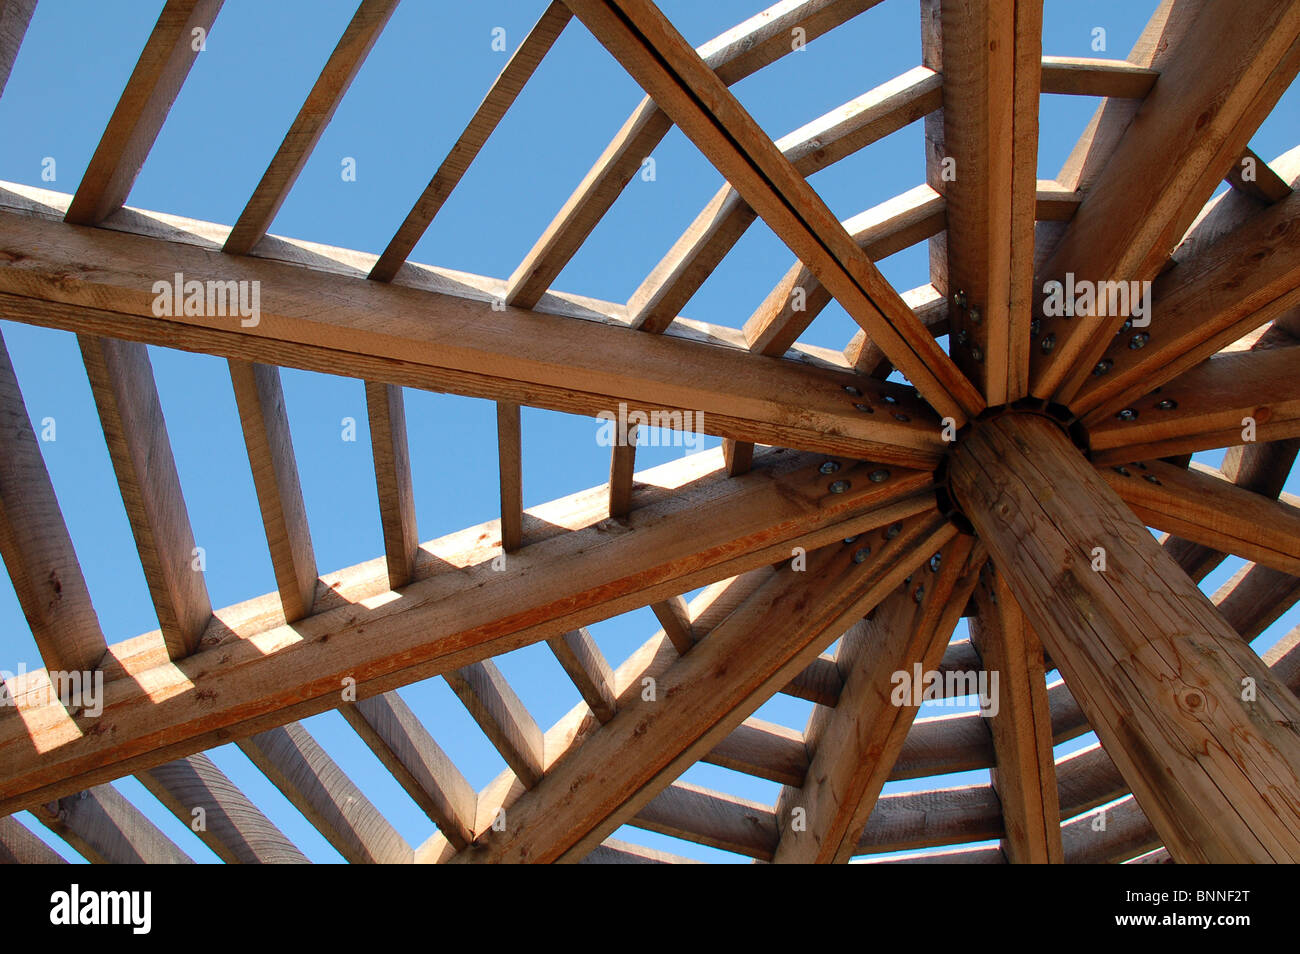 Gazebo in front of the interpretative center on Wiring-on-Stone National Park in Southern Alberta, Canada. roof detail. Stock Photo